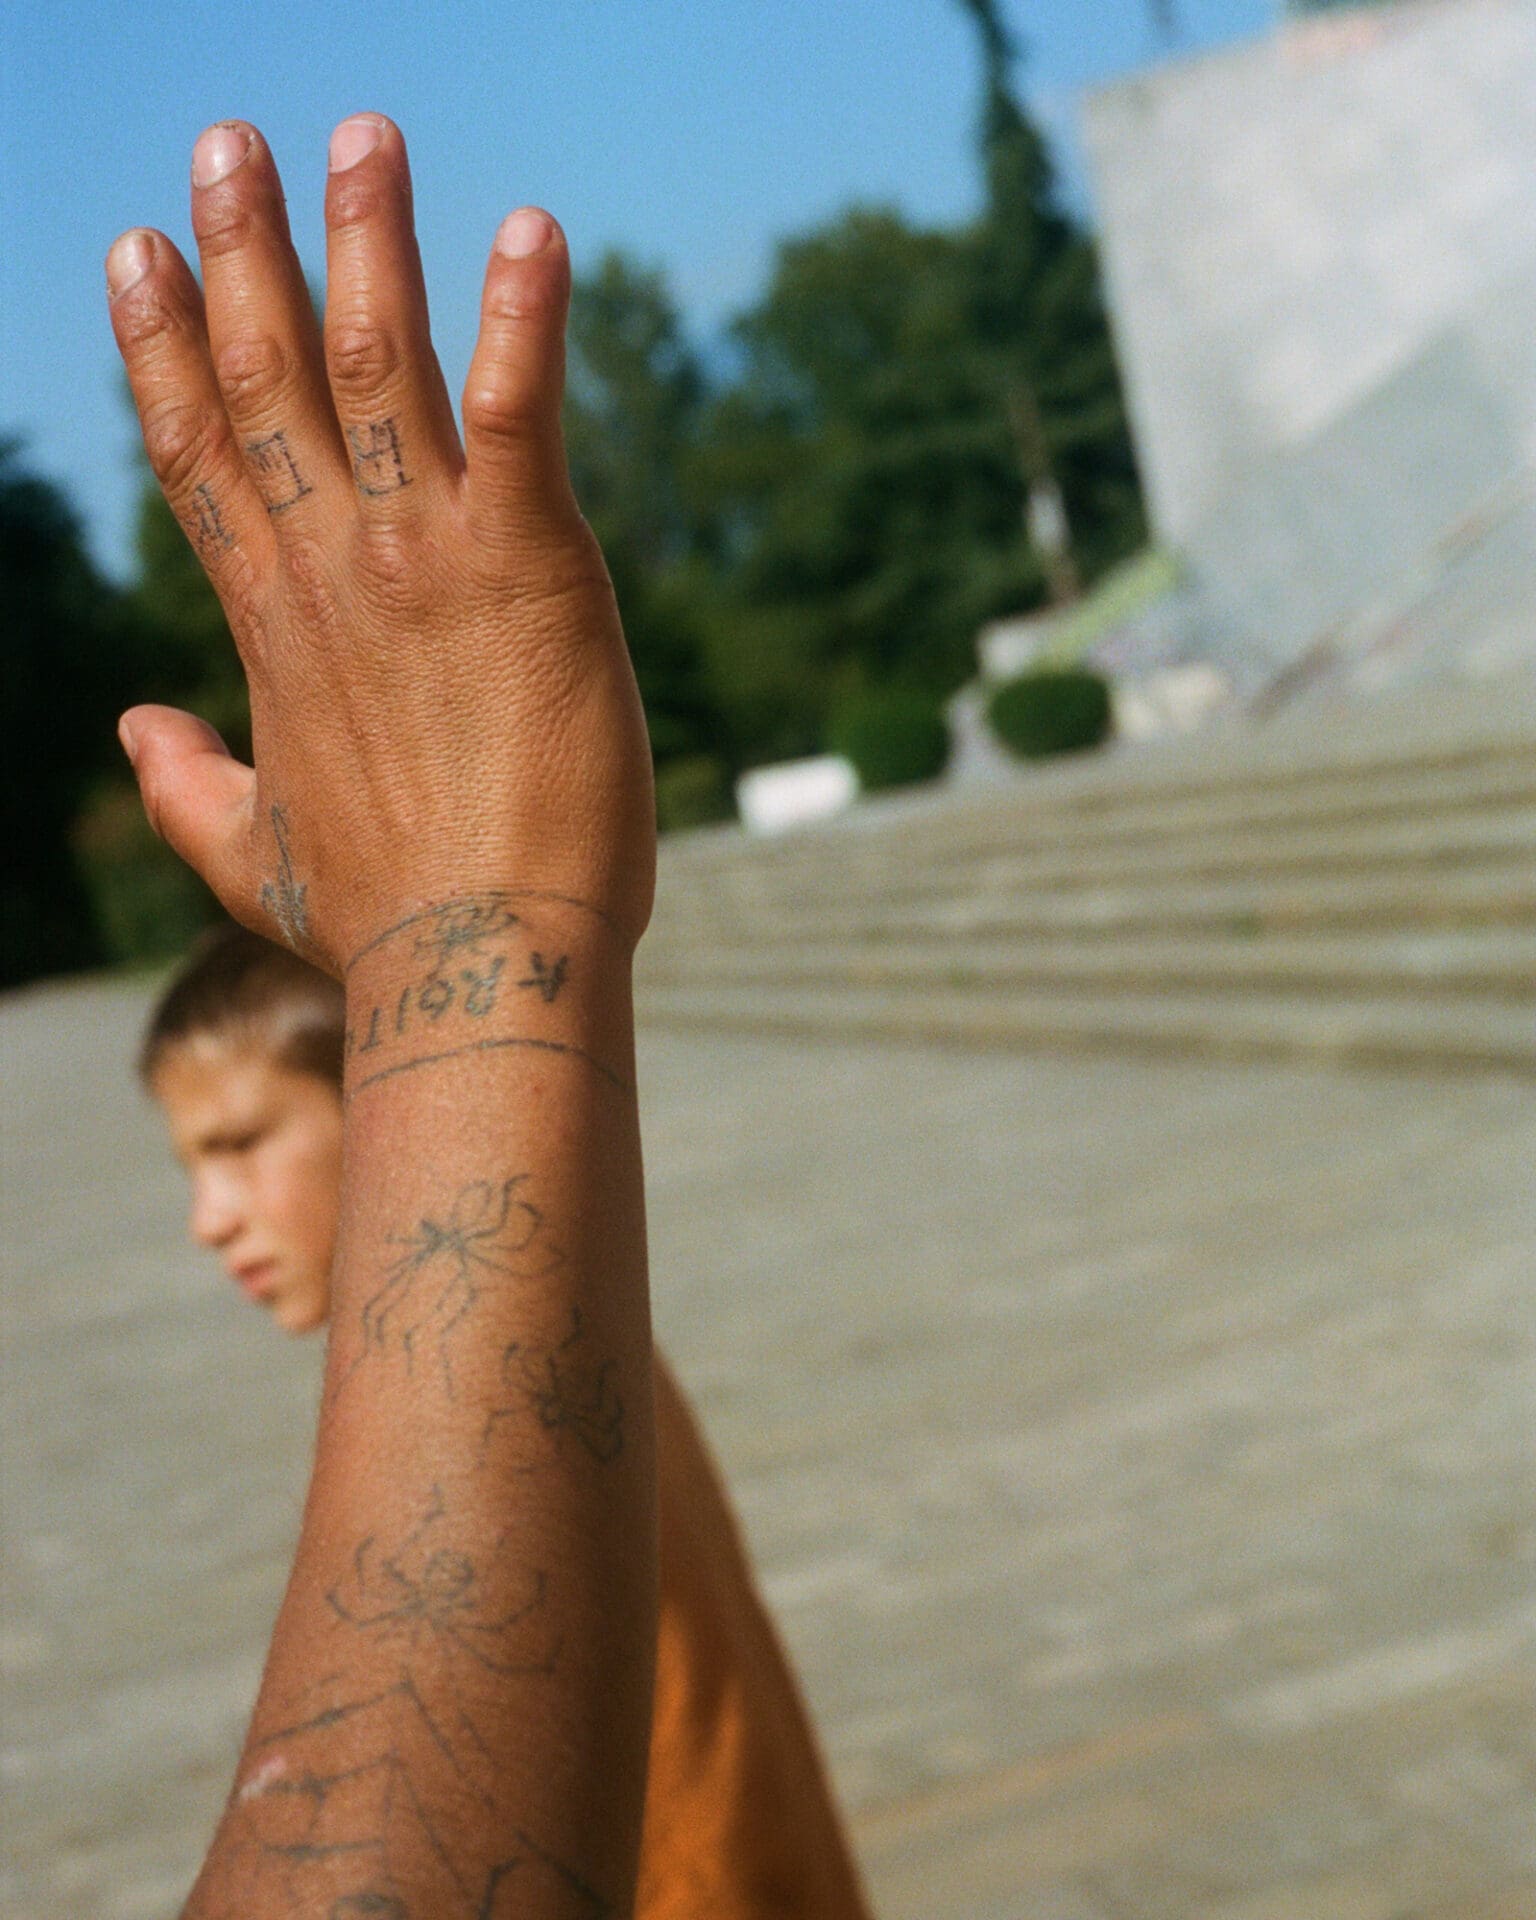 Hazel Gaskin photographs Albania | A boy raises his arm, tattooed with spiders, against a concrete backdrop